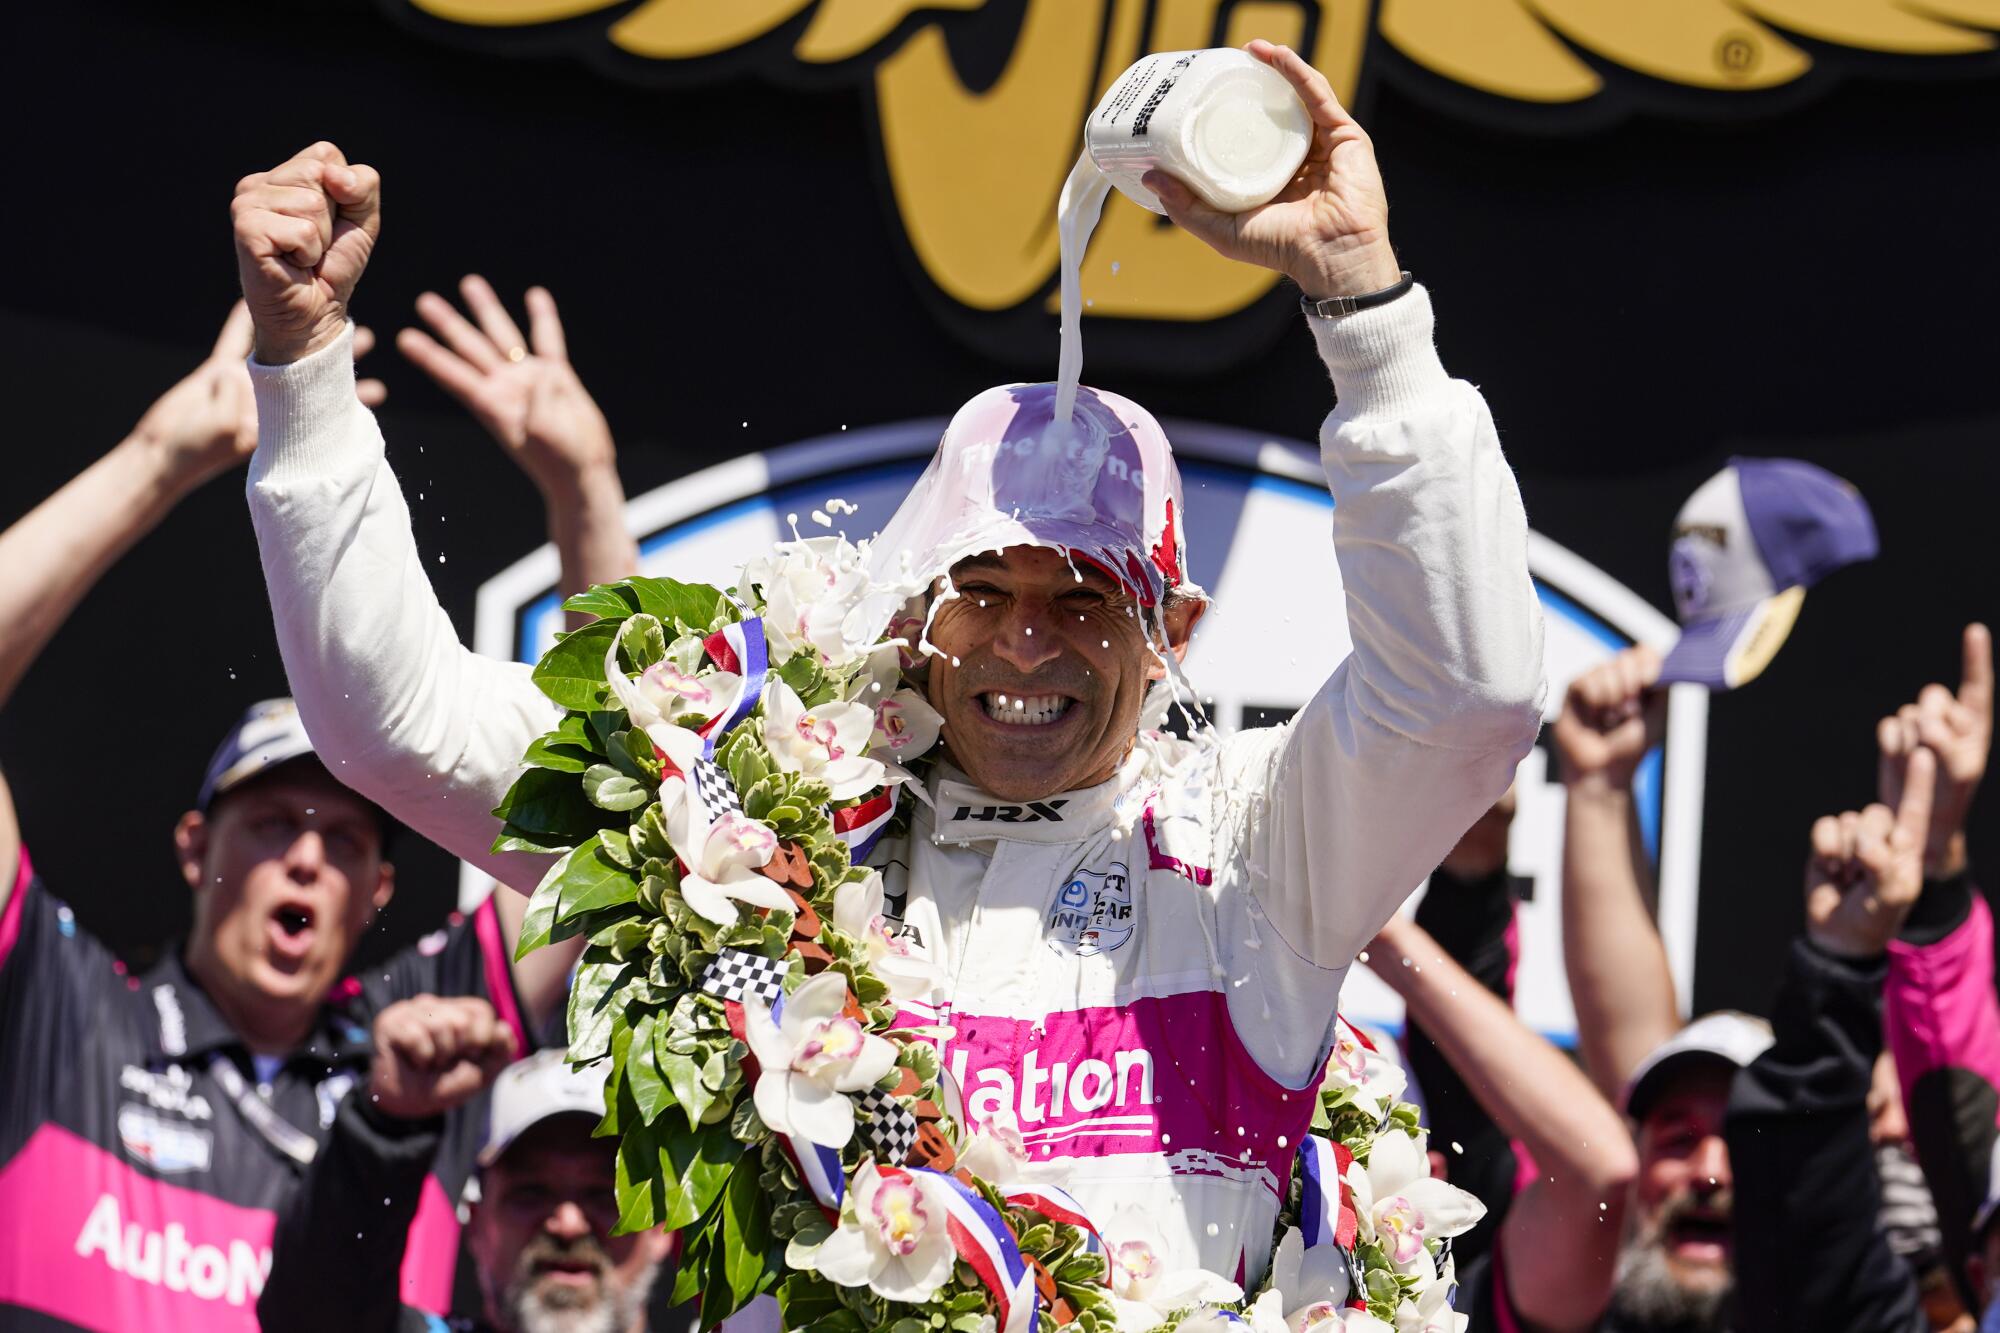 Helio Castroneves of Brazil celebrates after winning the Indianapolis 500 last year.